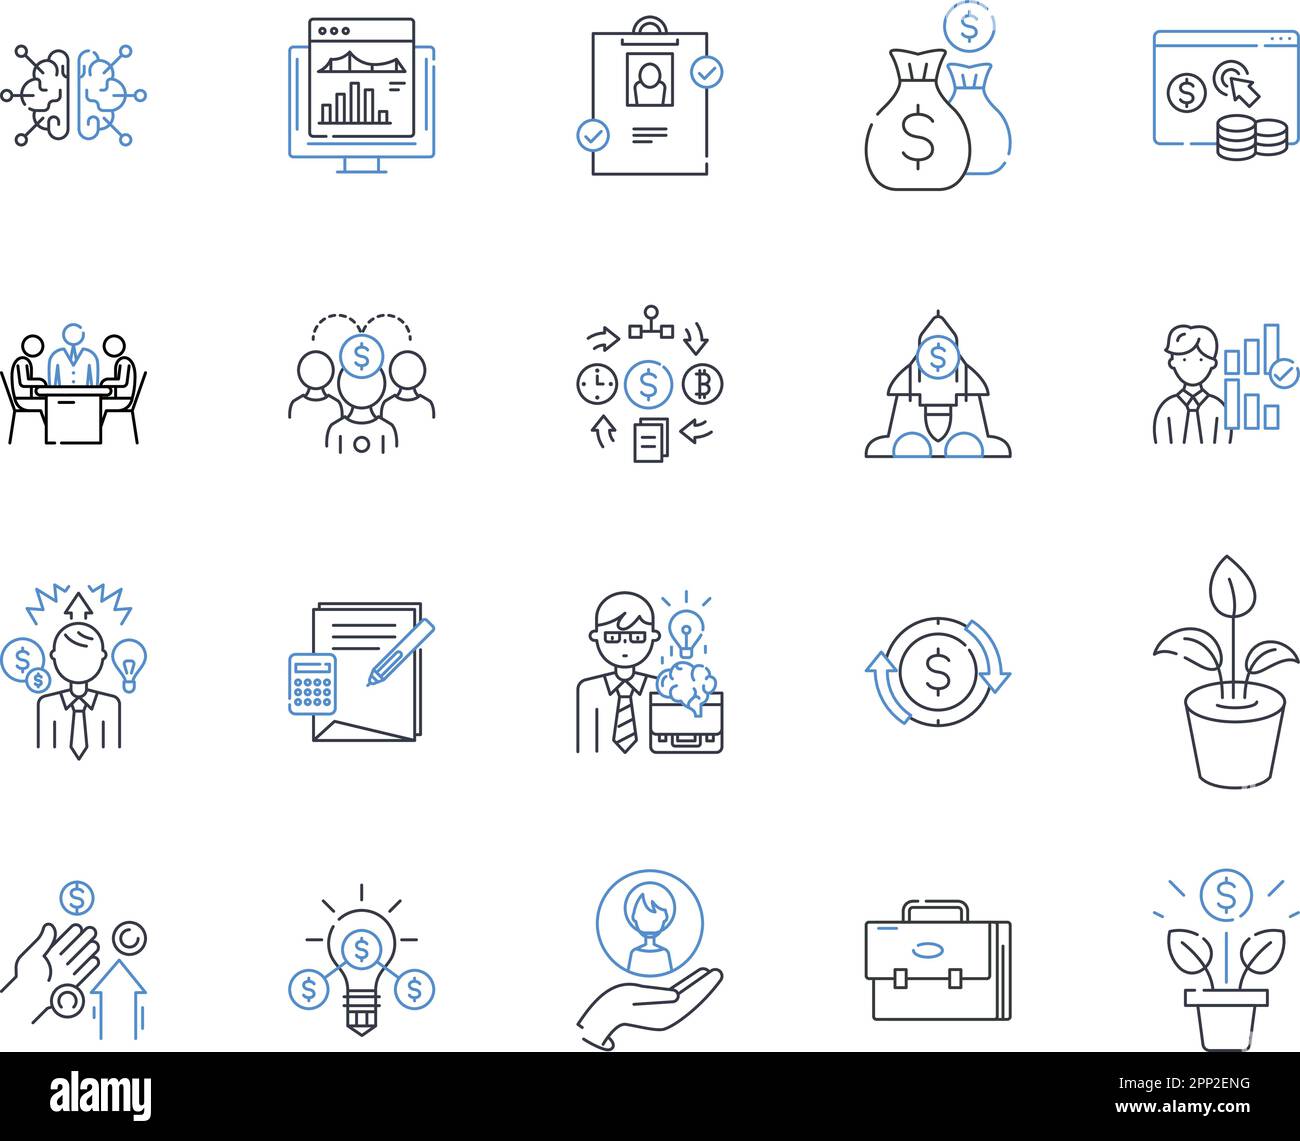 Cost accounting line icons collection. Budgeting, Analysis, Allocation, Costing, Cost-benefit, Inventory, Management vector and linear illustration Stock Vector